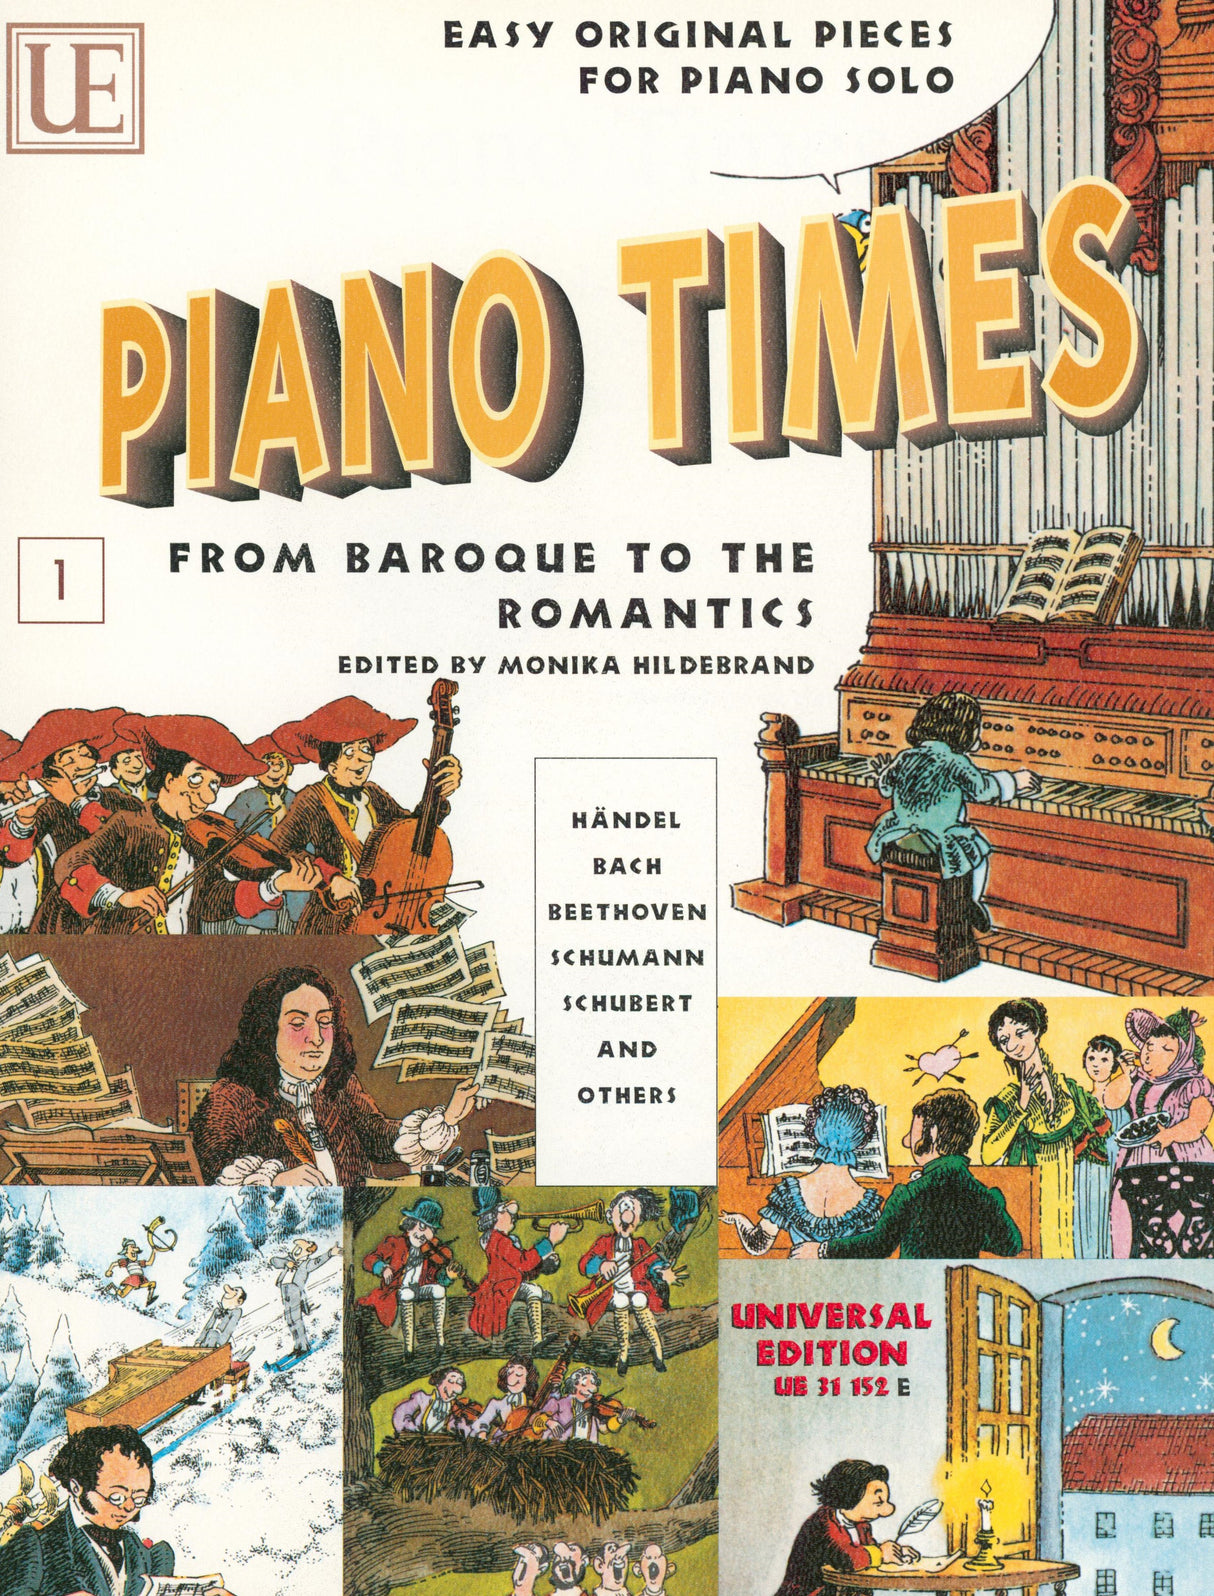 Piano Times - Book 1 (From Baroque to the Romantics)